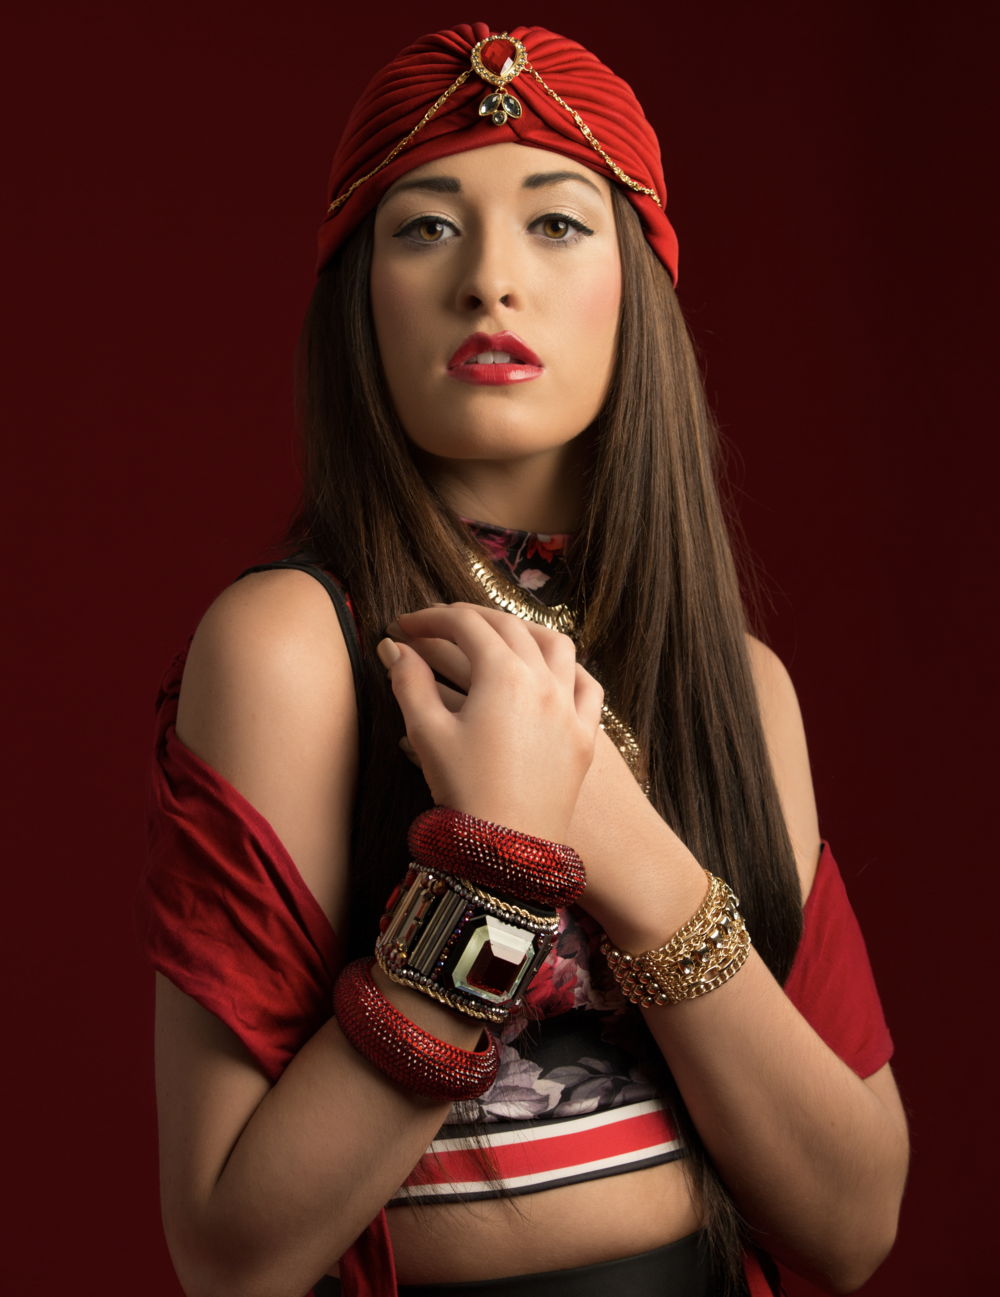 red+fashion+photography+model+myrtle+beach